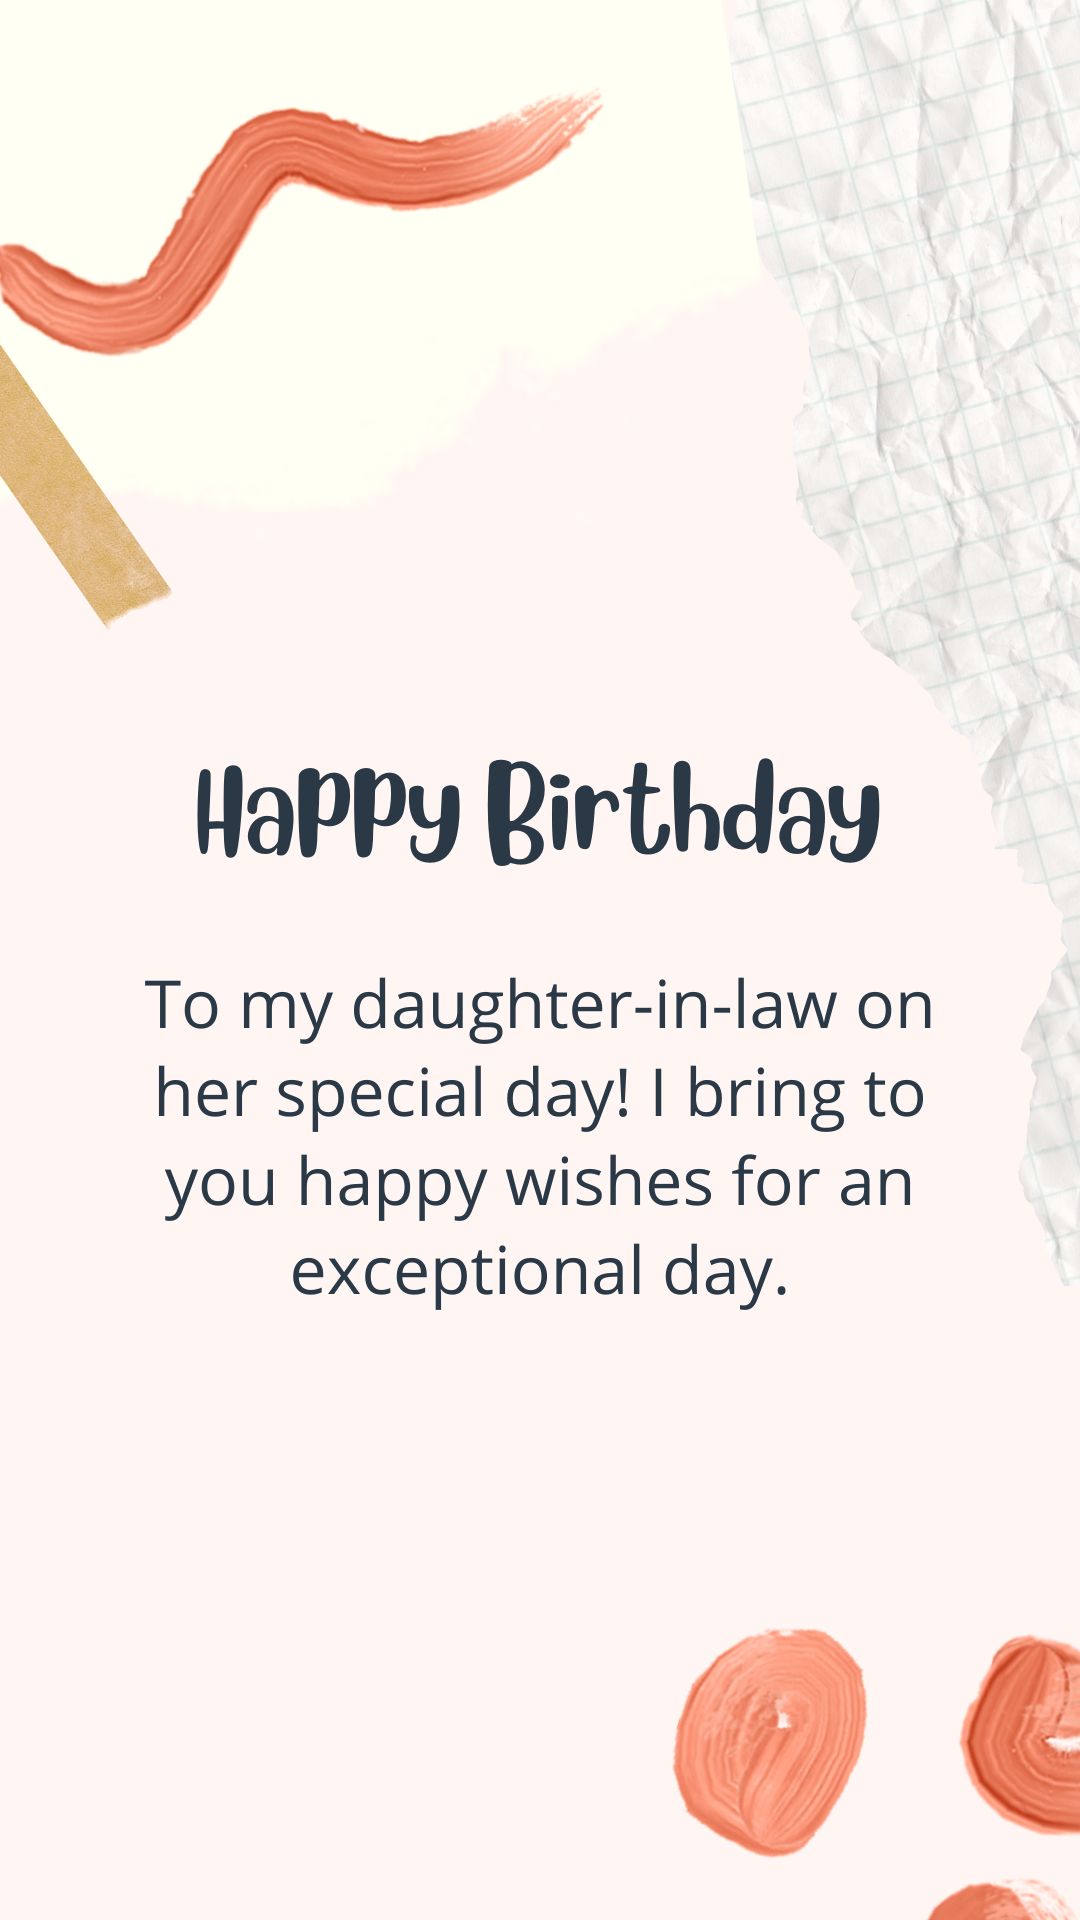 birthday images for daughter in law wishes